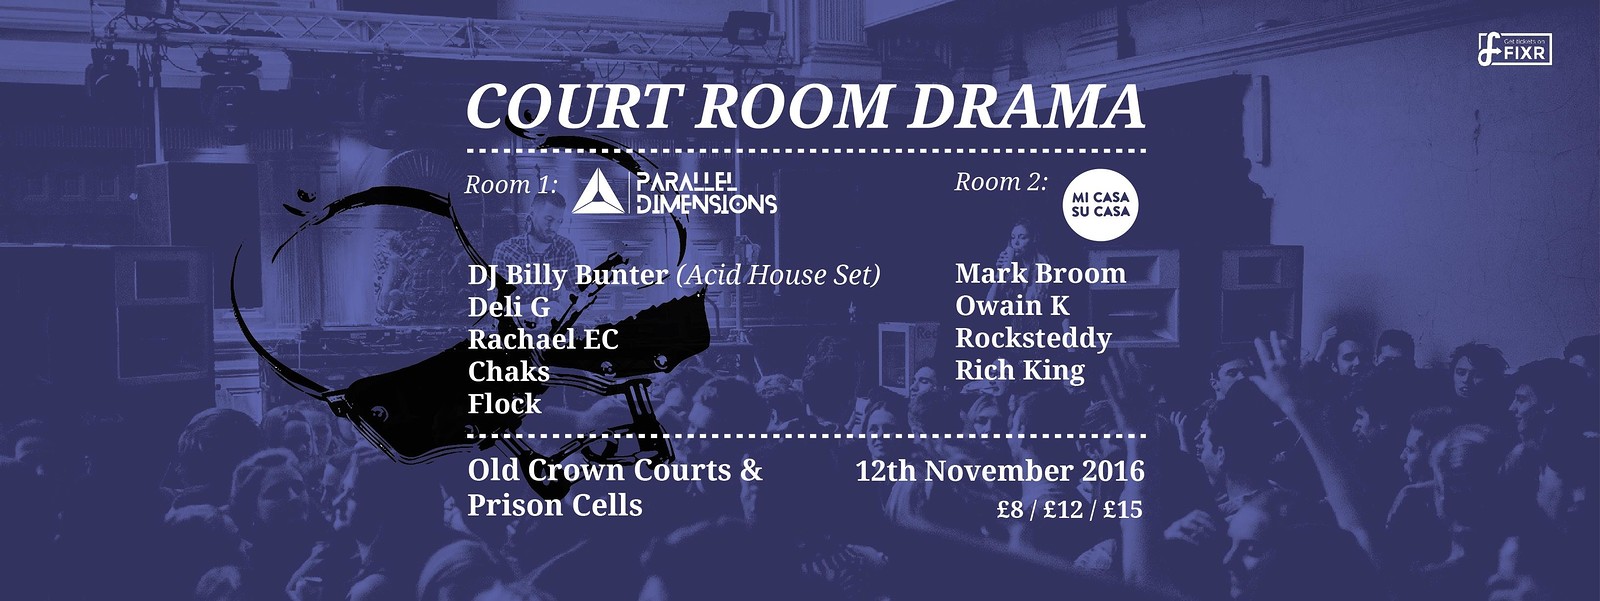 Court Room Drama Pt.2:  Billy Bunter & Mark Broom at The Old Crown Courts